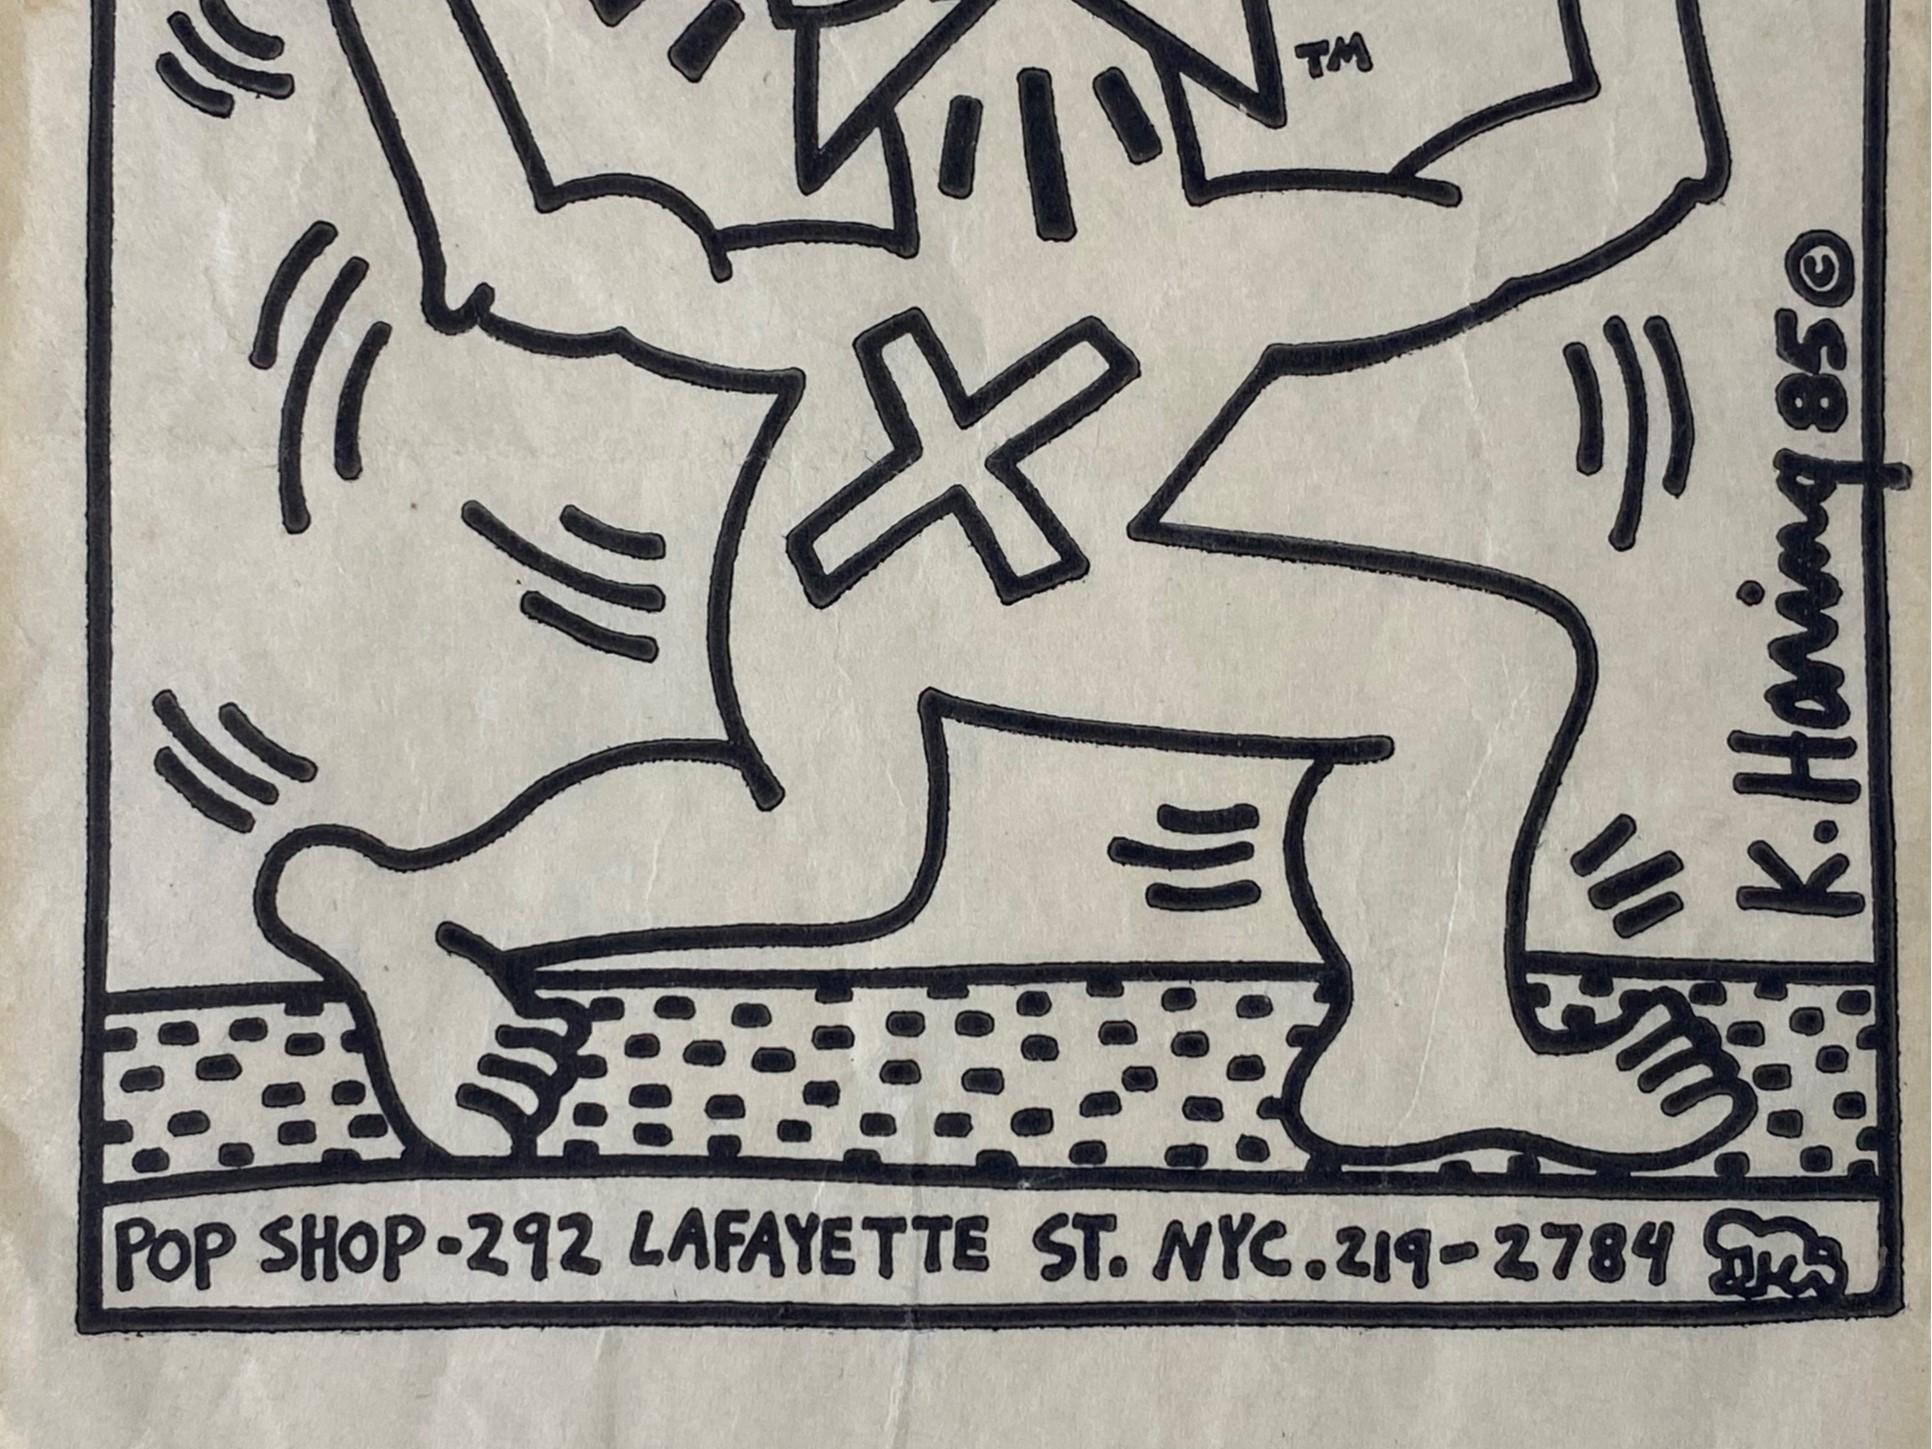 Paper Keith Haring Original New York City Pop Shop Lithograph Bag With Bonus, 1980s For Sale